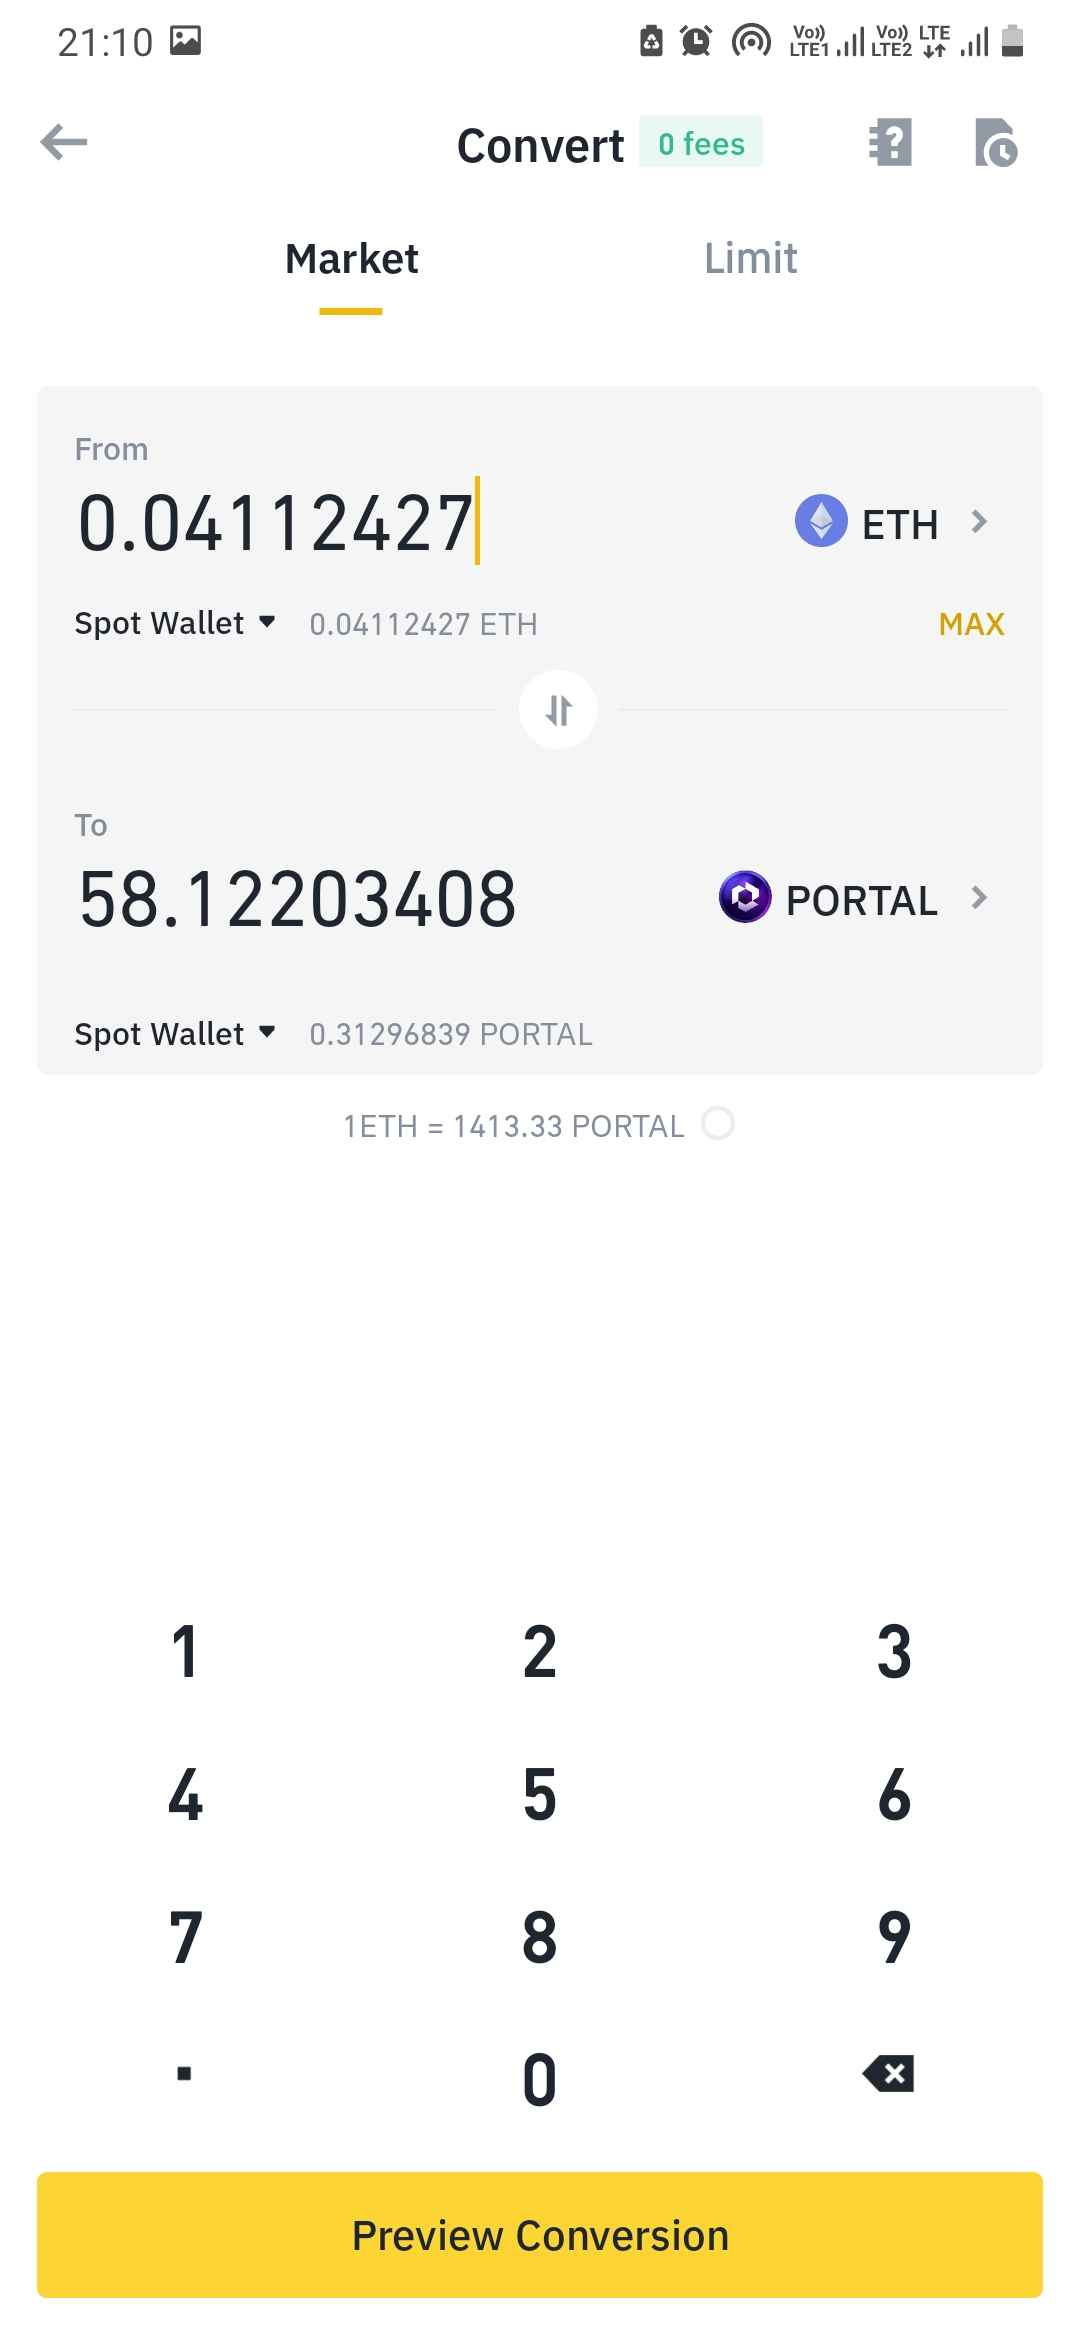 How to buy Portal Coin Token in India?